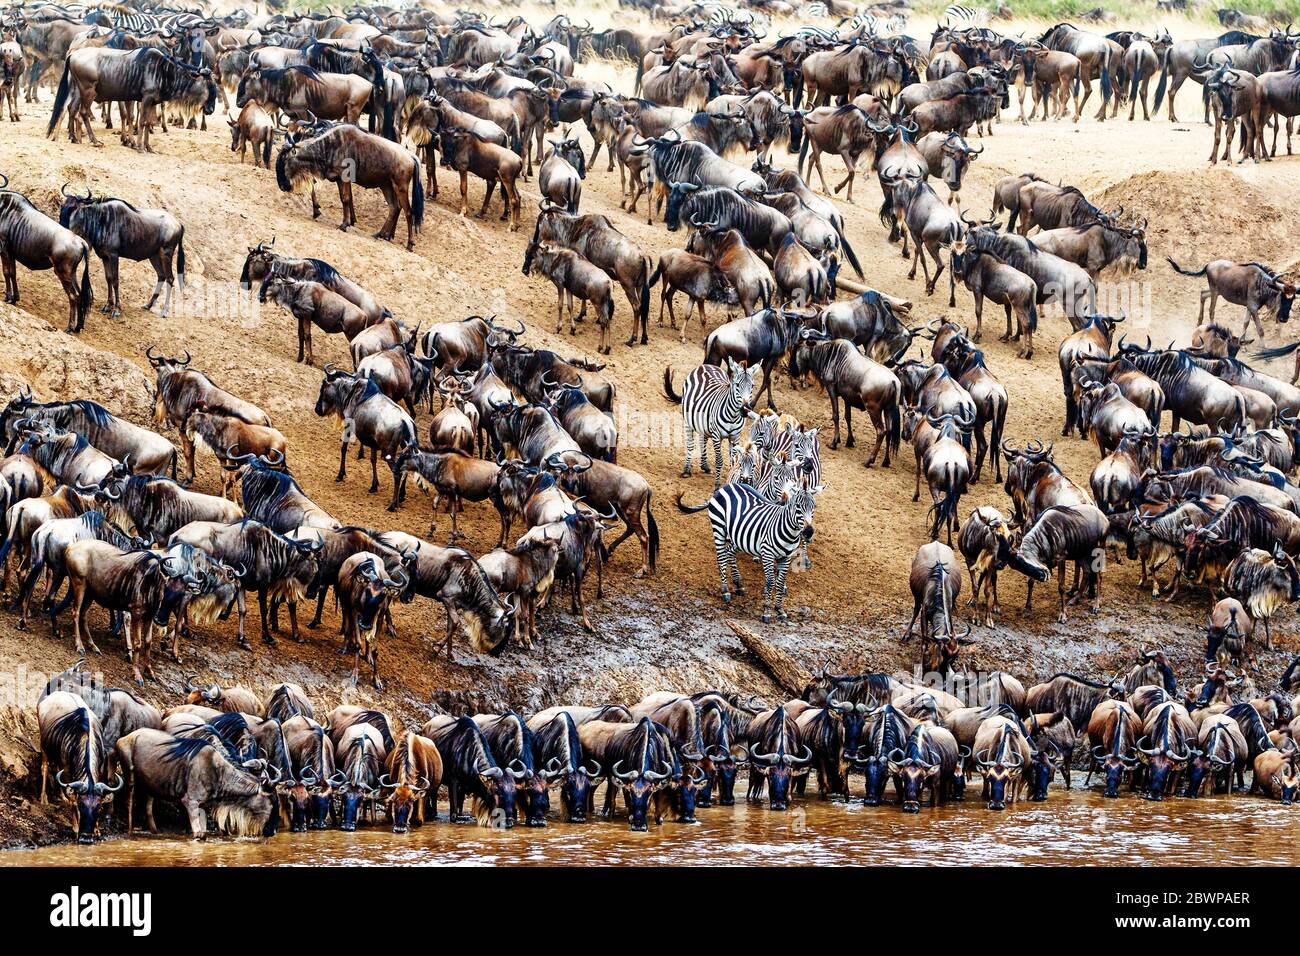 A few zebra standing out in a large crowd of wildebeest in Kenya, Africa Stock Photo